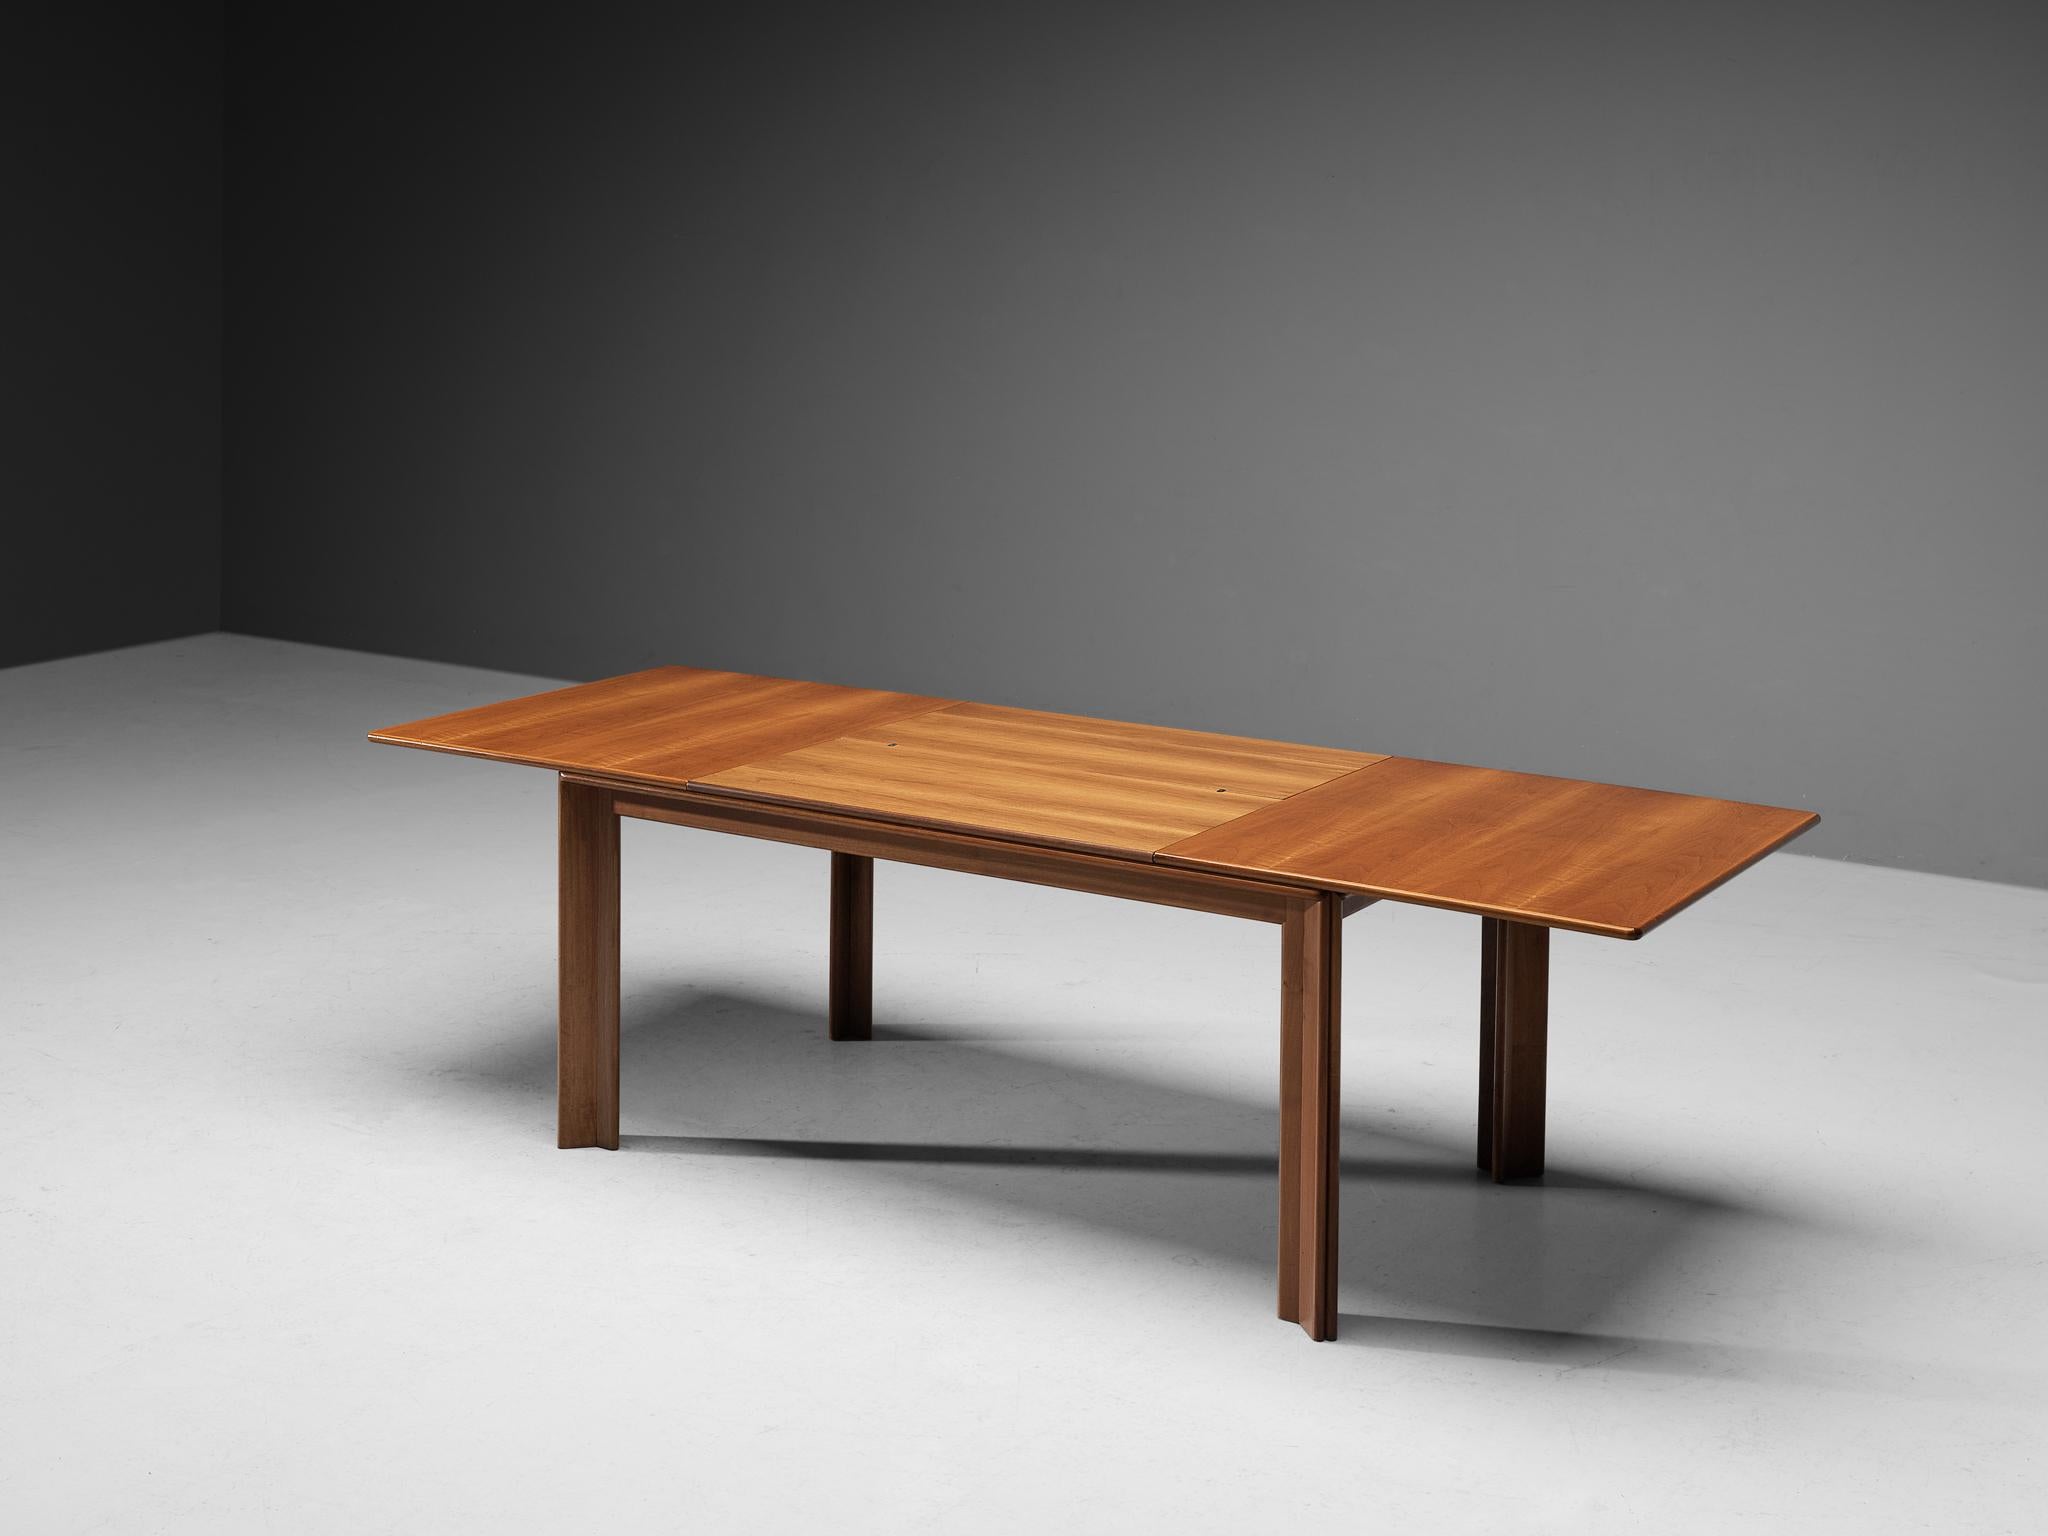 Afra & Tobia Scarpa for Molteni, extendable dining table, walnut, Italy, 1970s

Functional table designed by Afra & Tobia Scarpa for Molteni. The table is executed in beautiful and warm Italian walnut wood. The top is extendable with two leaves